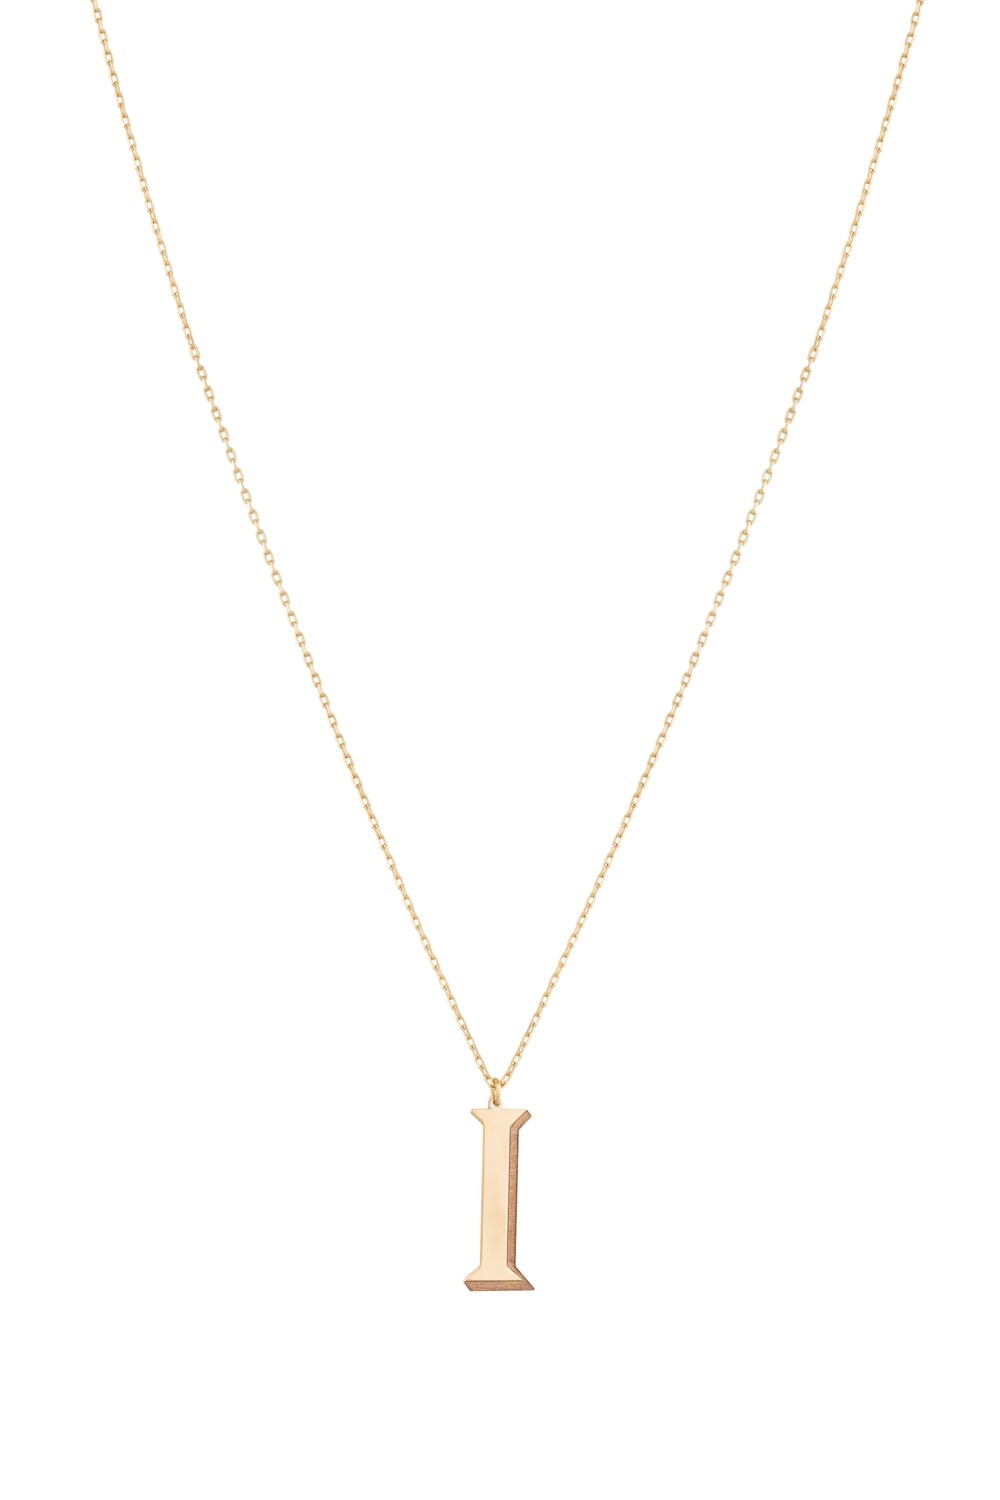 Initials Gold Necklace Letter I